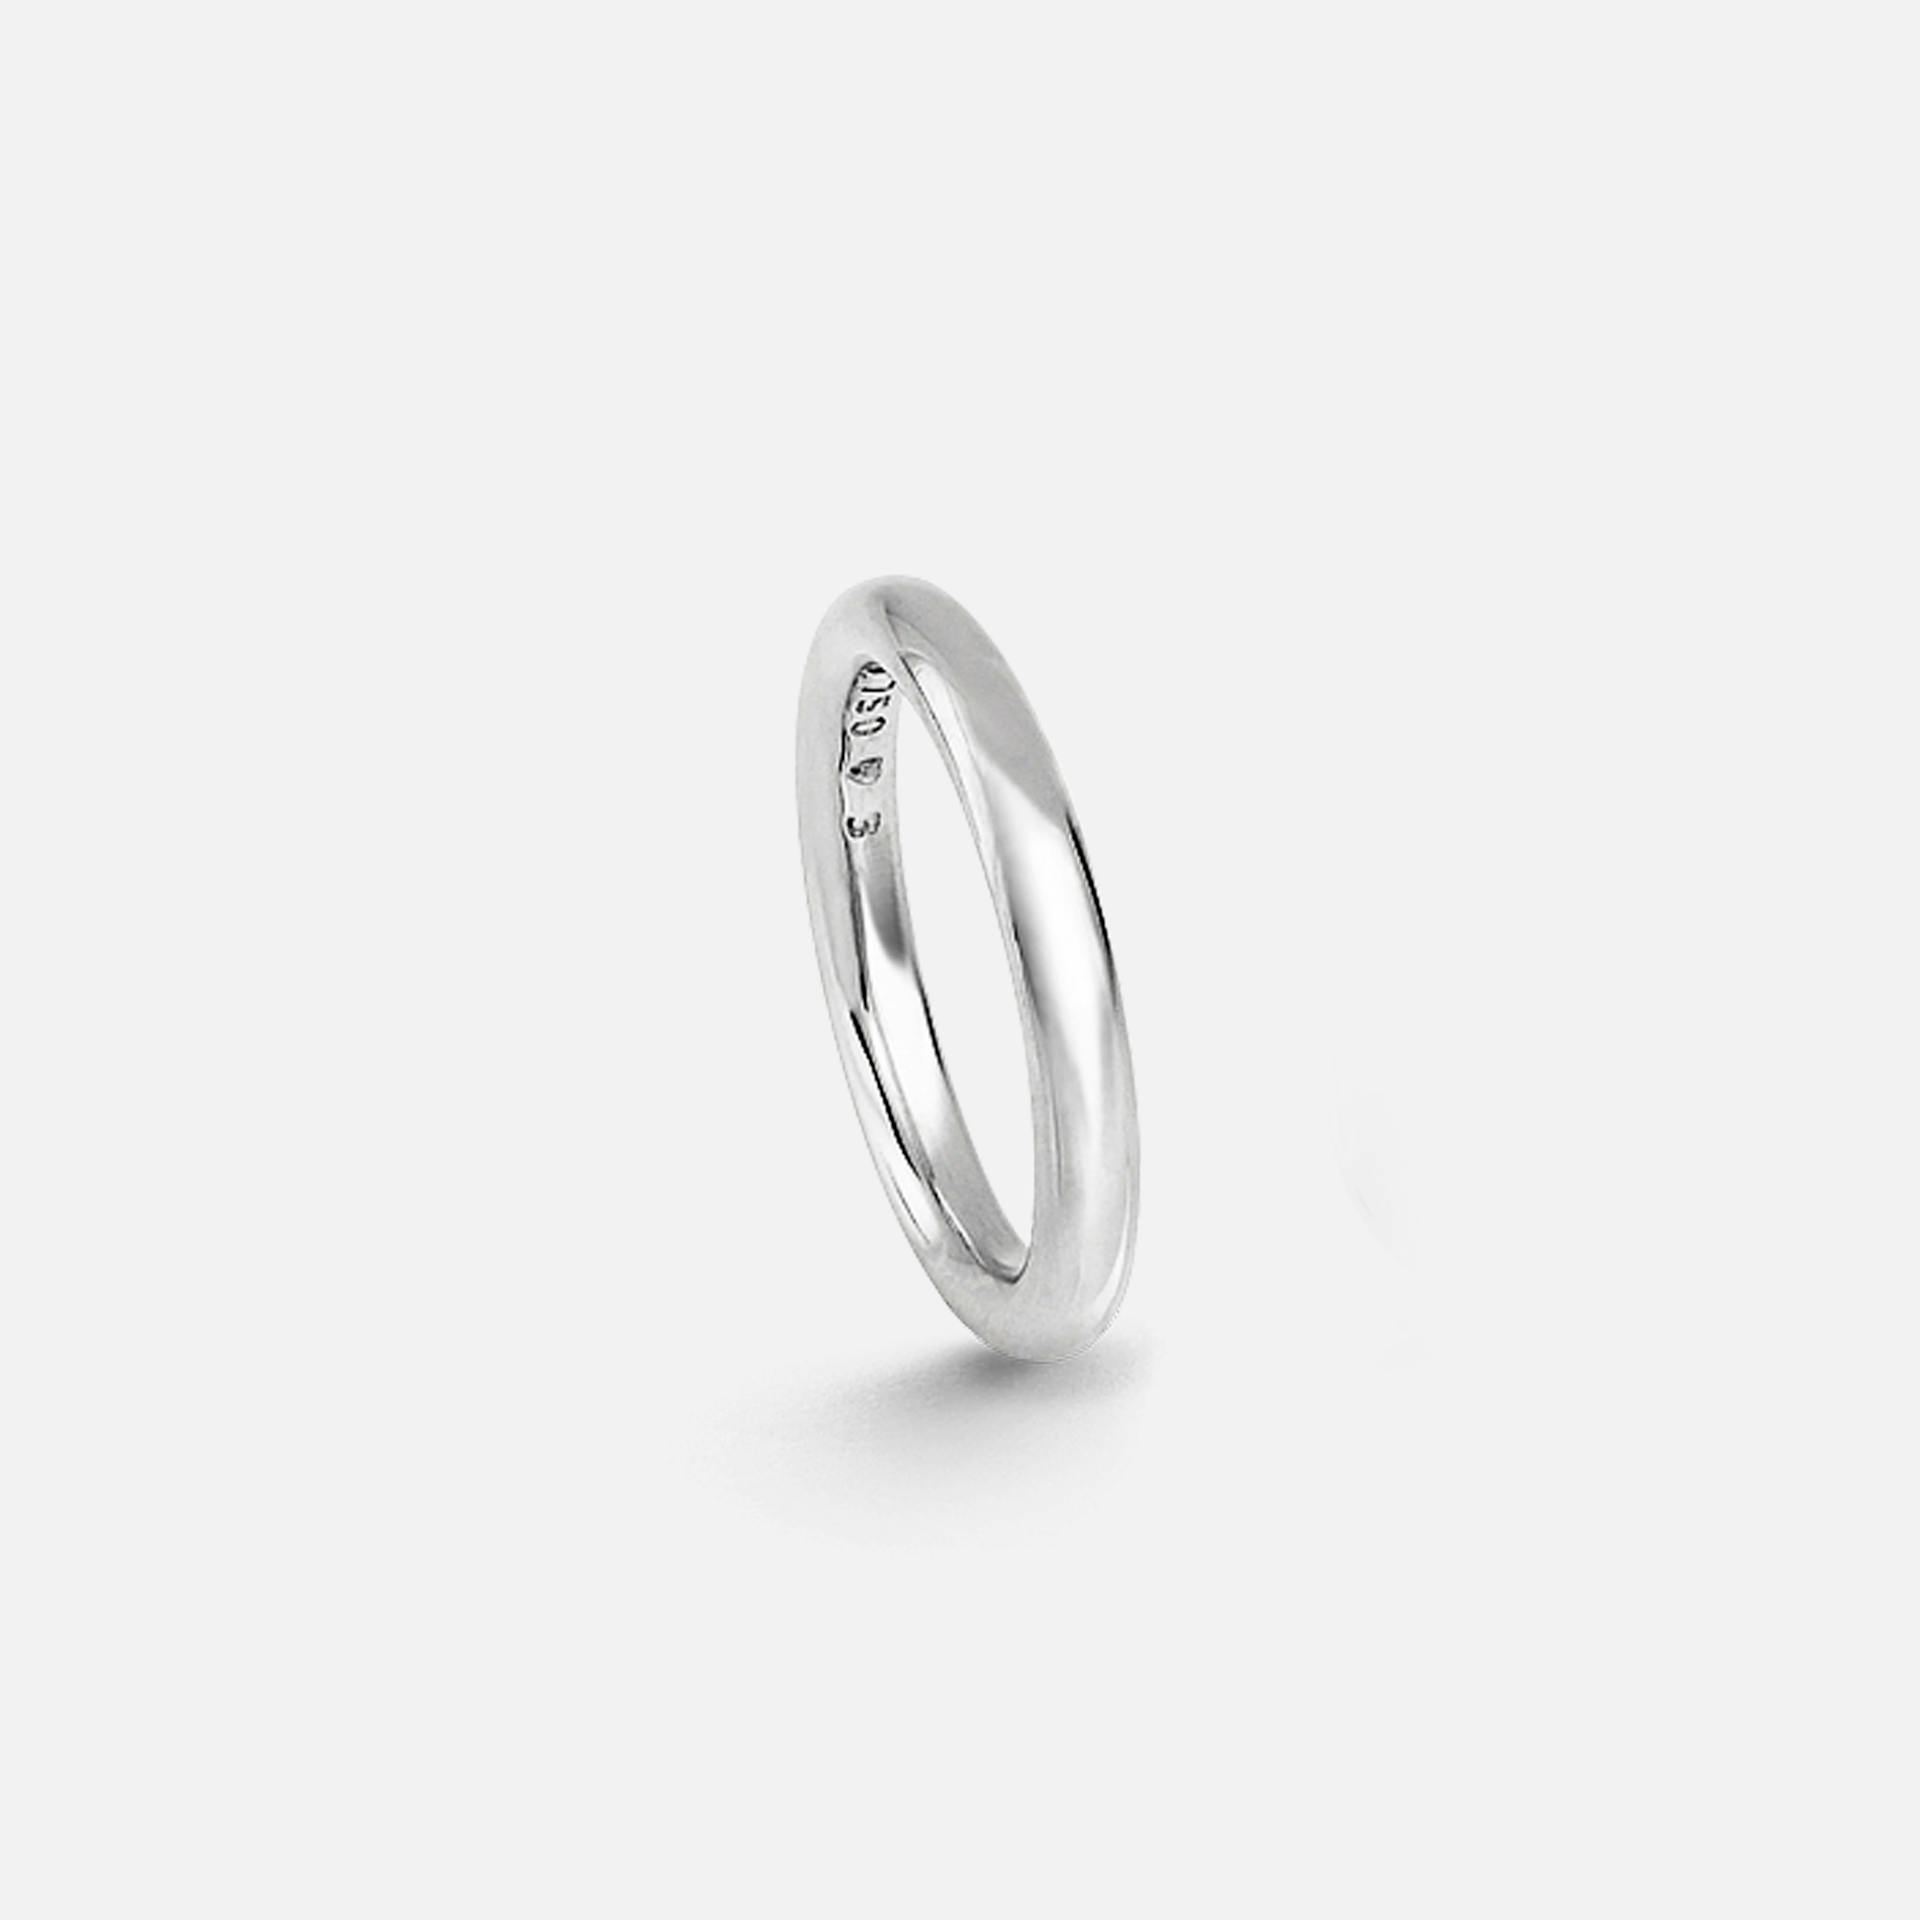 The Ring mens 3mm 18k polished white gold